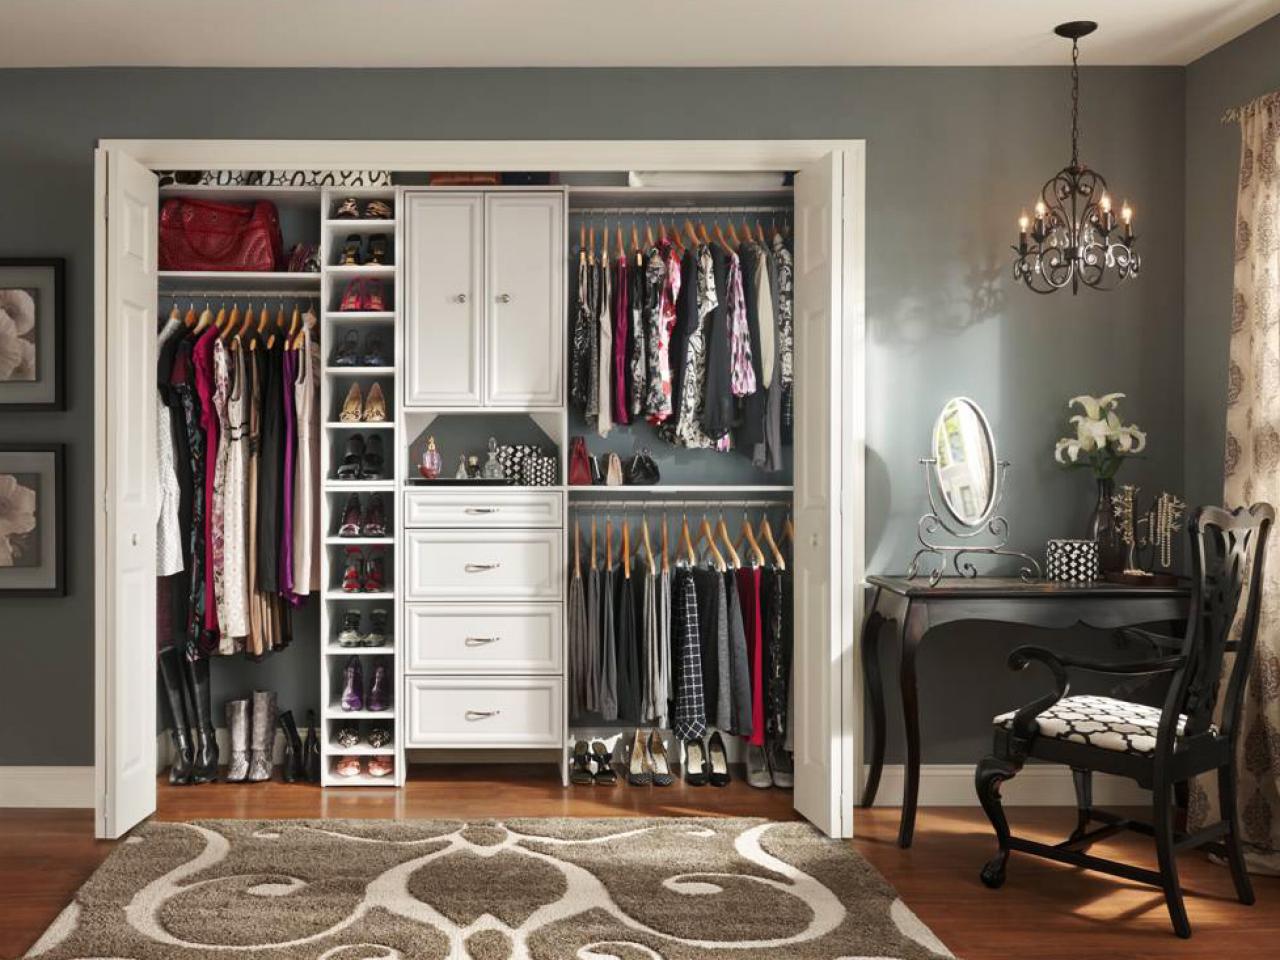 Reach-in Vs. Walk-in Closets: Which one should you pick?